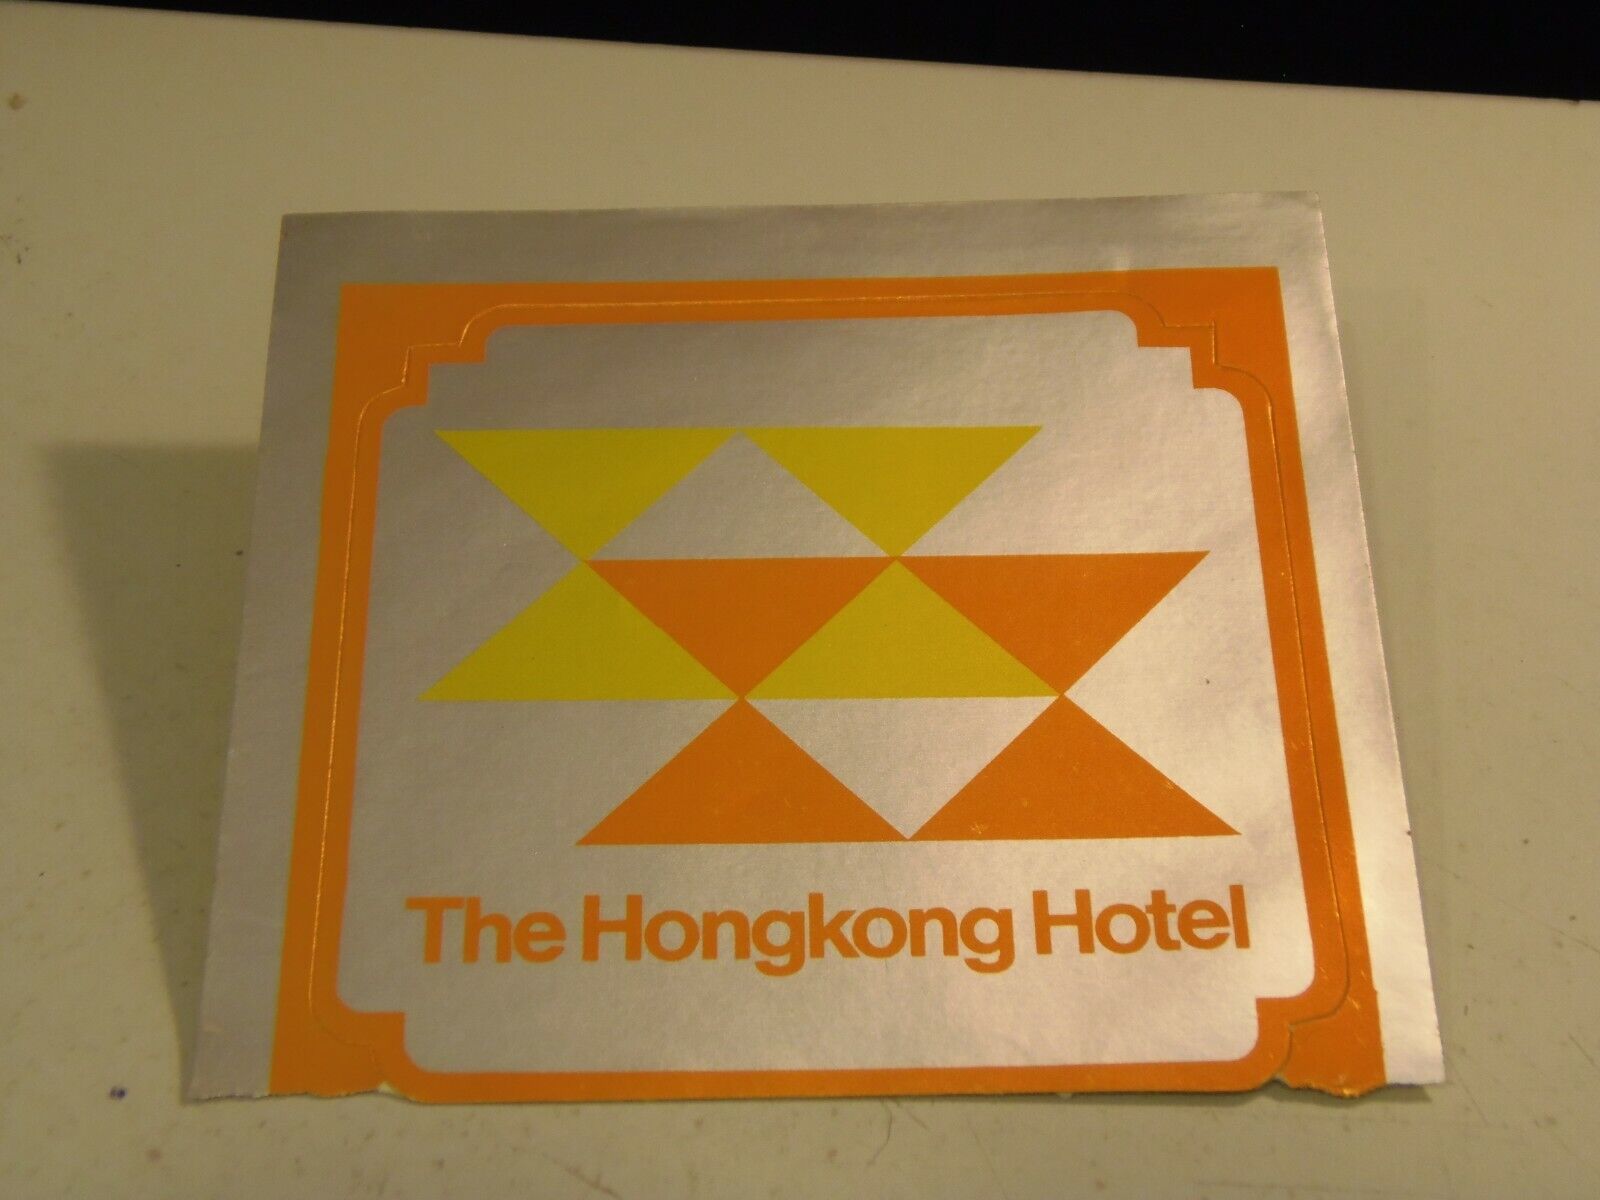 The Hong Kong Hotel  Vintage Luggage Label/Sticker  1/27/21